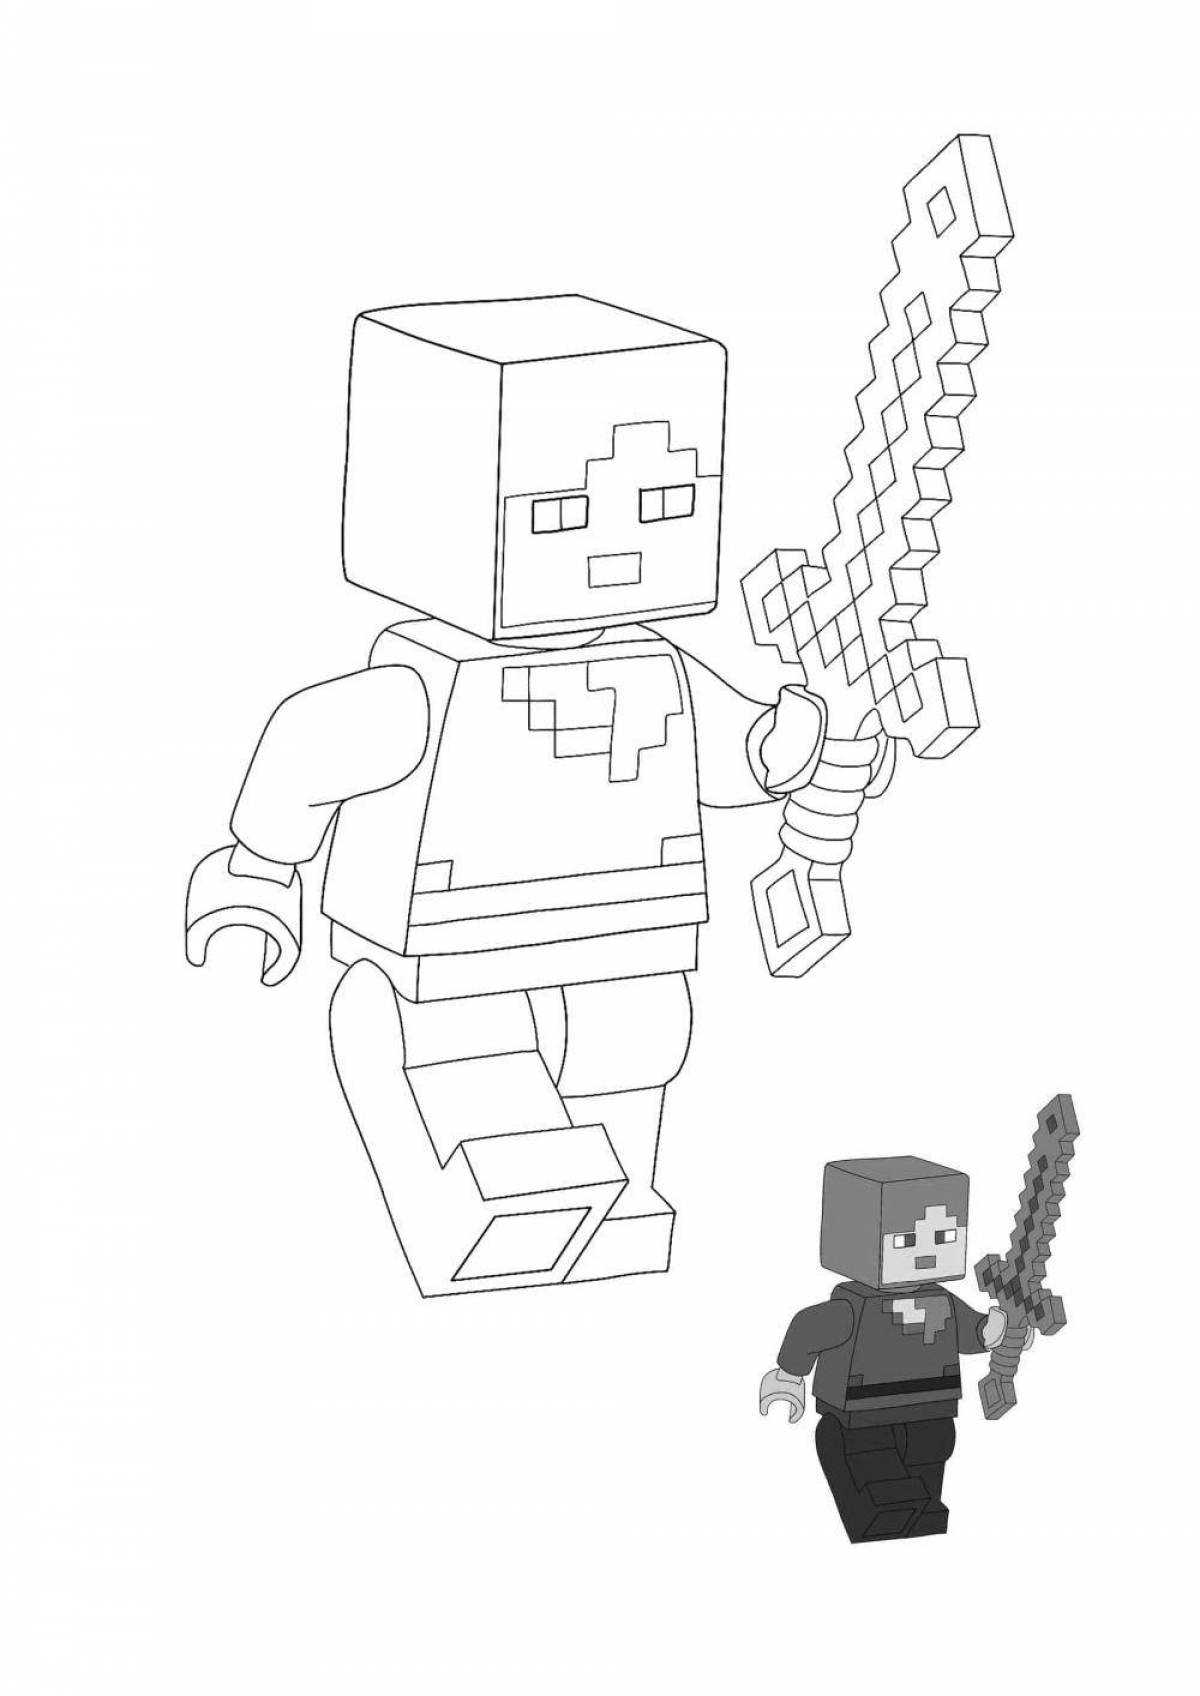 Incredible minecraft gripper coloring book